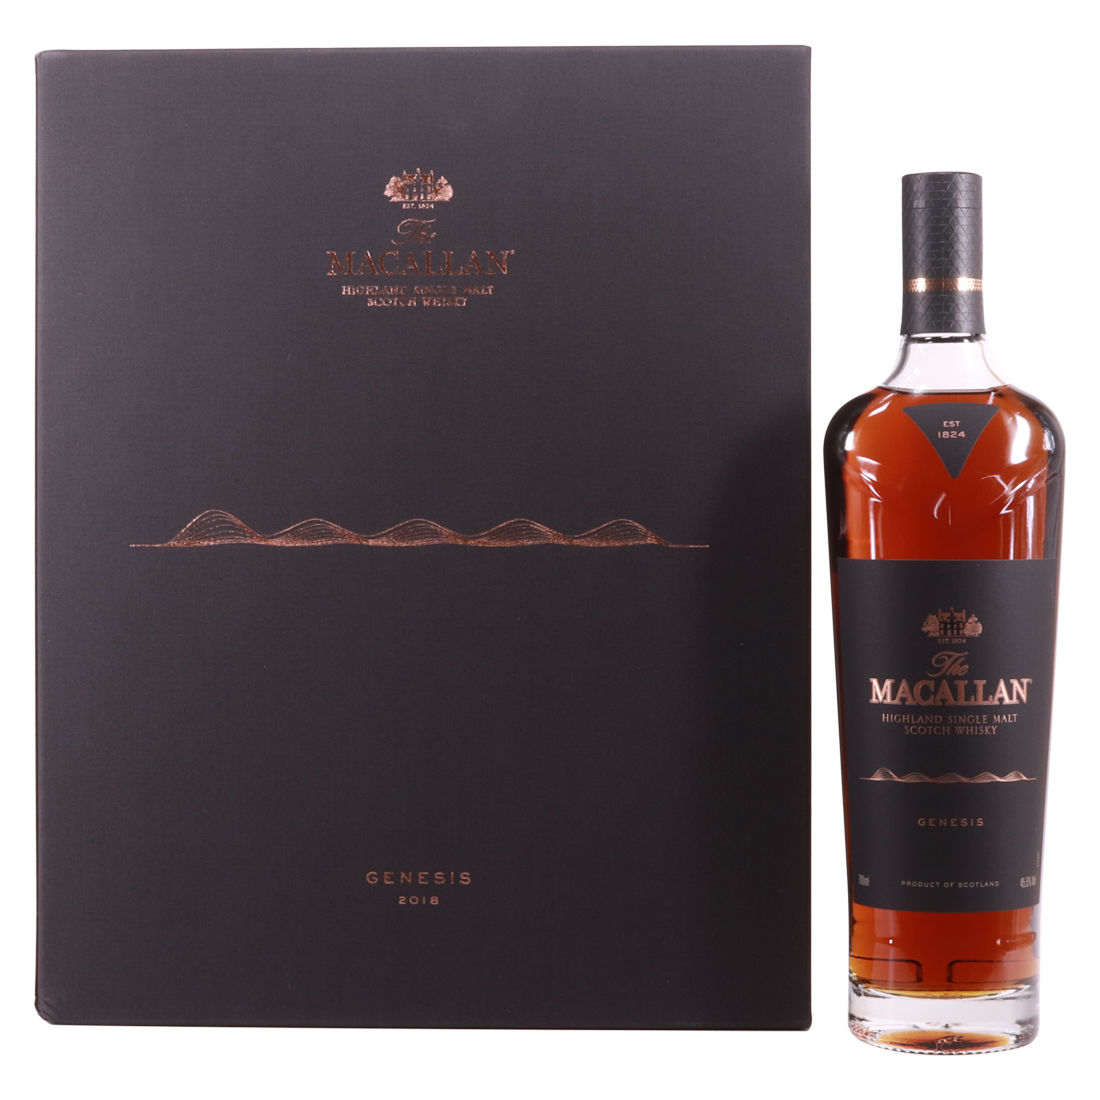 Macallan Genesis 2018 Auction The Grand Whisky Auction